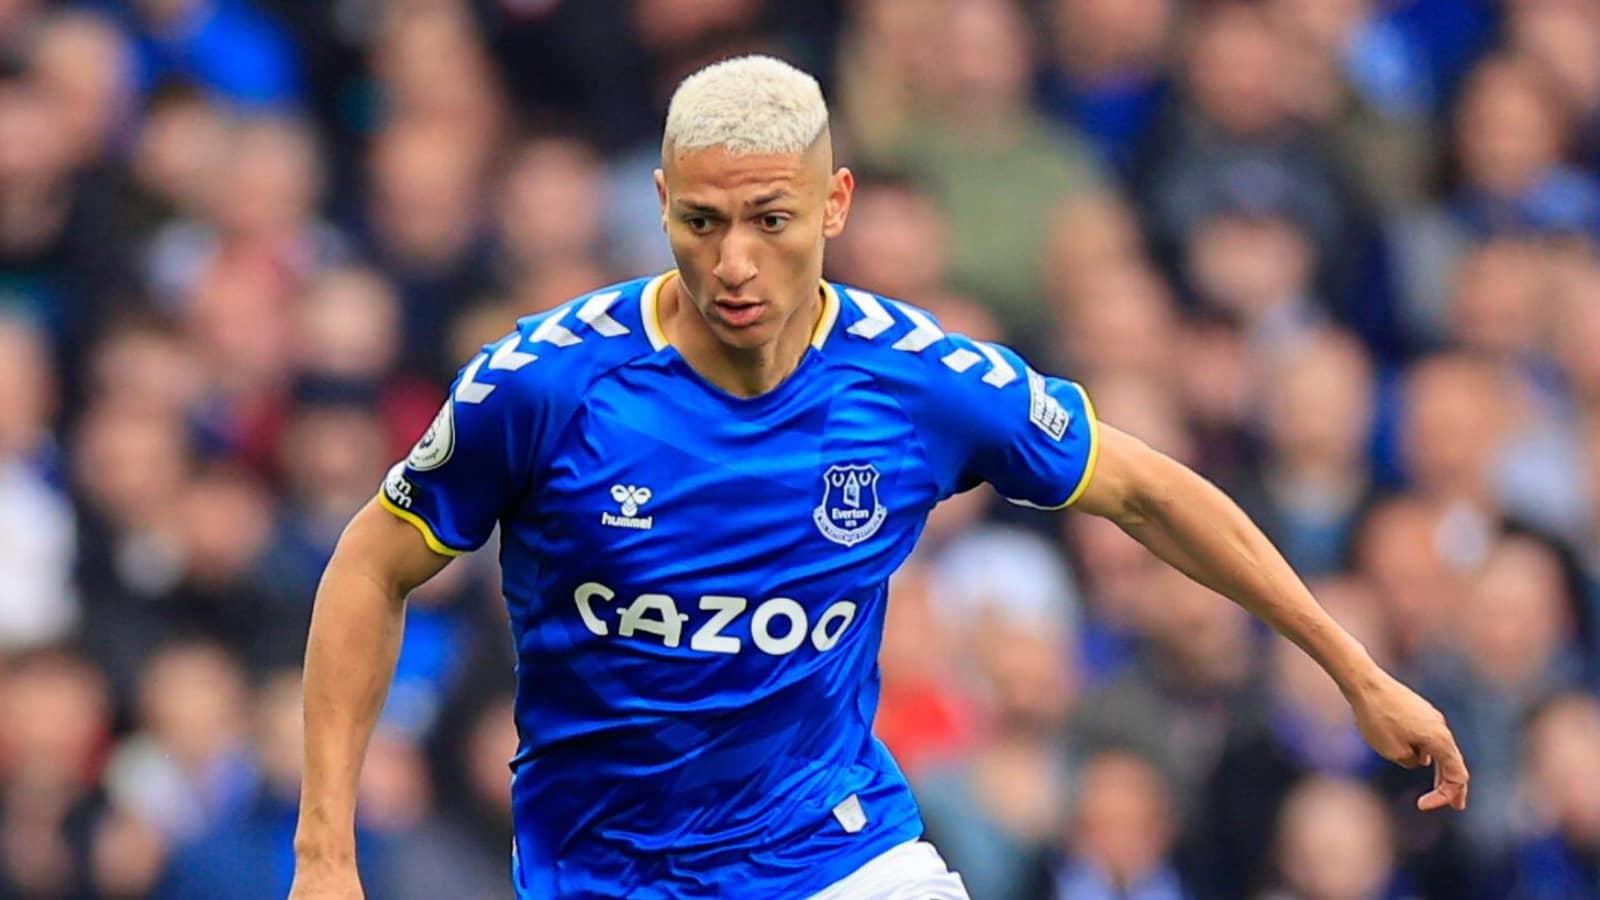 Tottenham set to sign Richarlison from Everton for £50m initial deal